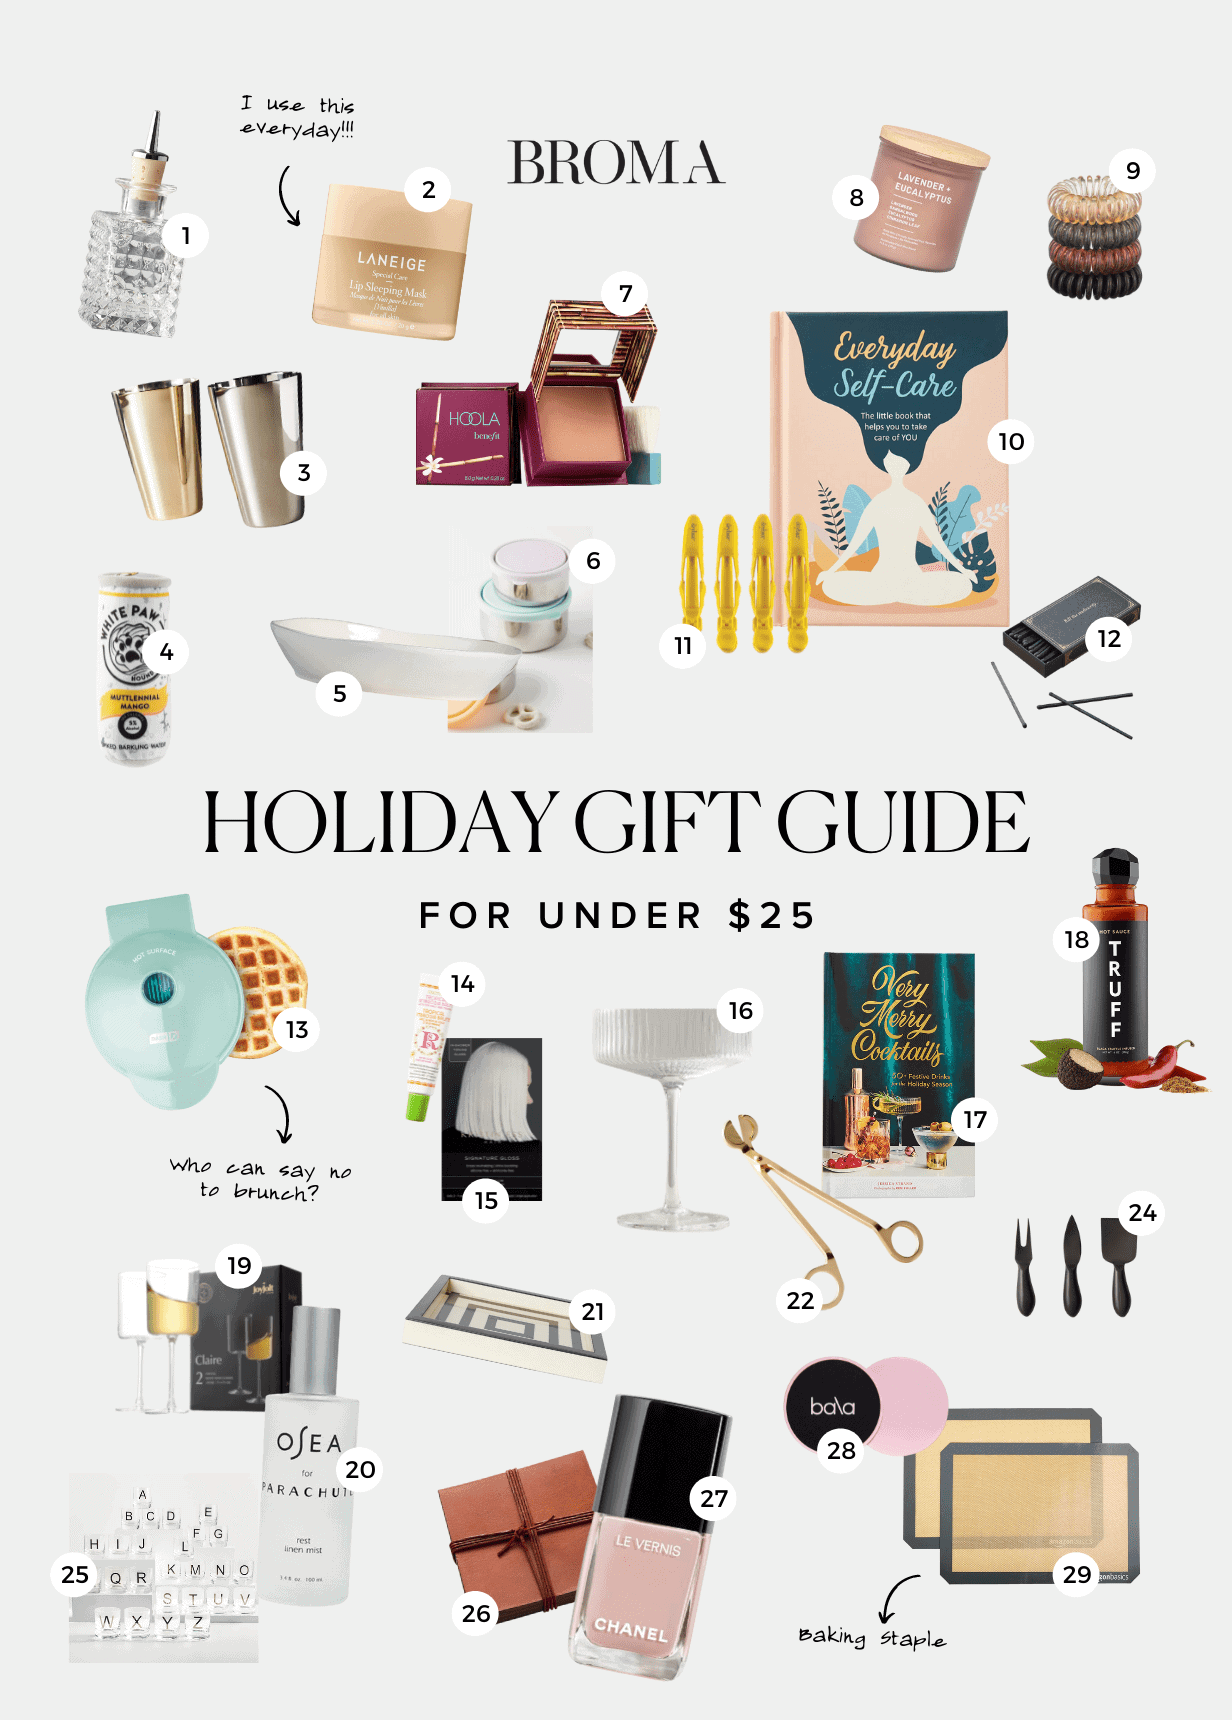 https://bromabakery.com/wp-content/uploads/2021/11/HOLIDAY-GIFT-GUIDE-7.png